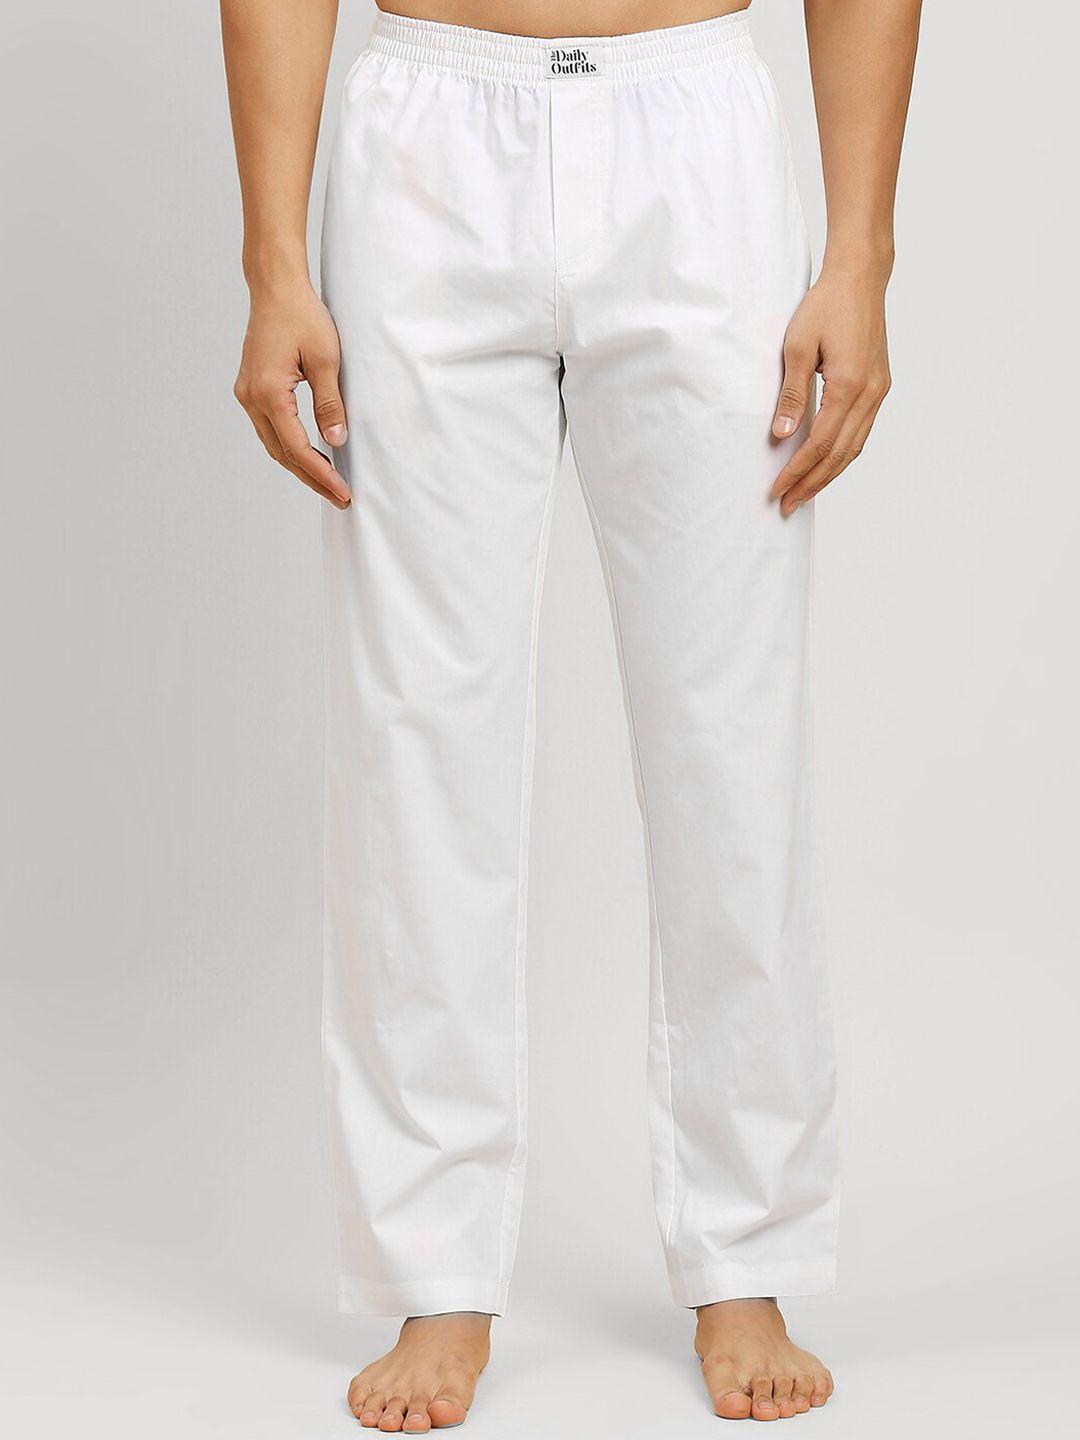 the daily outfits men mid-rise cotton lounge pants